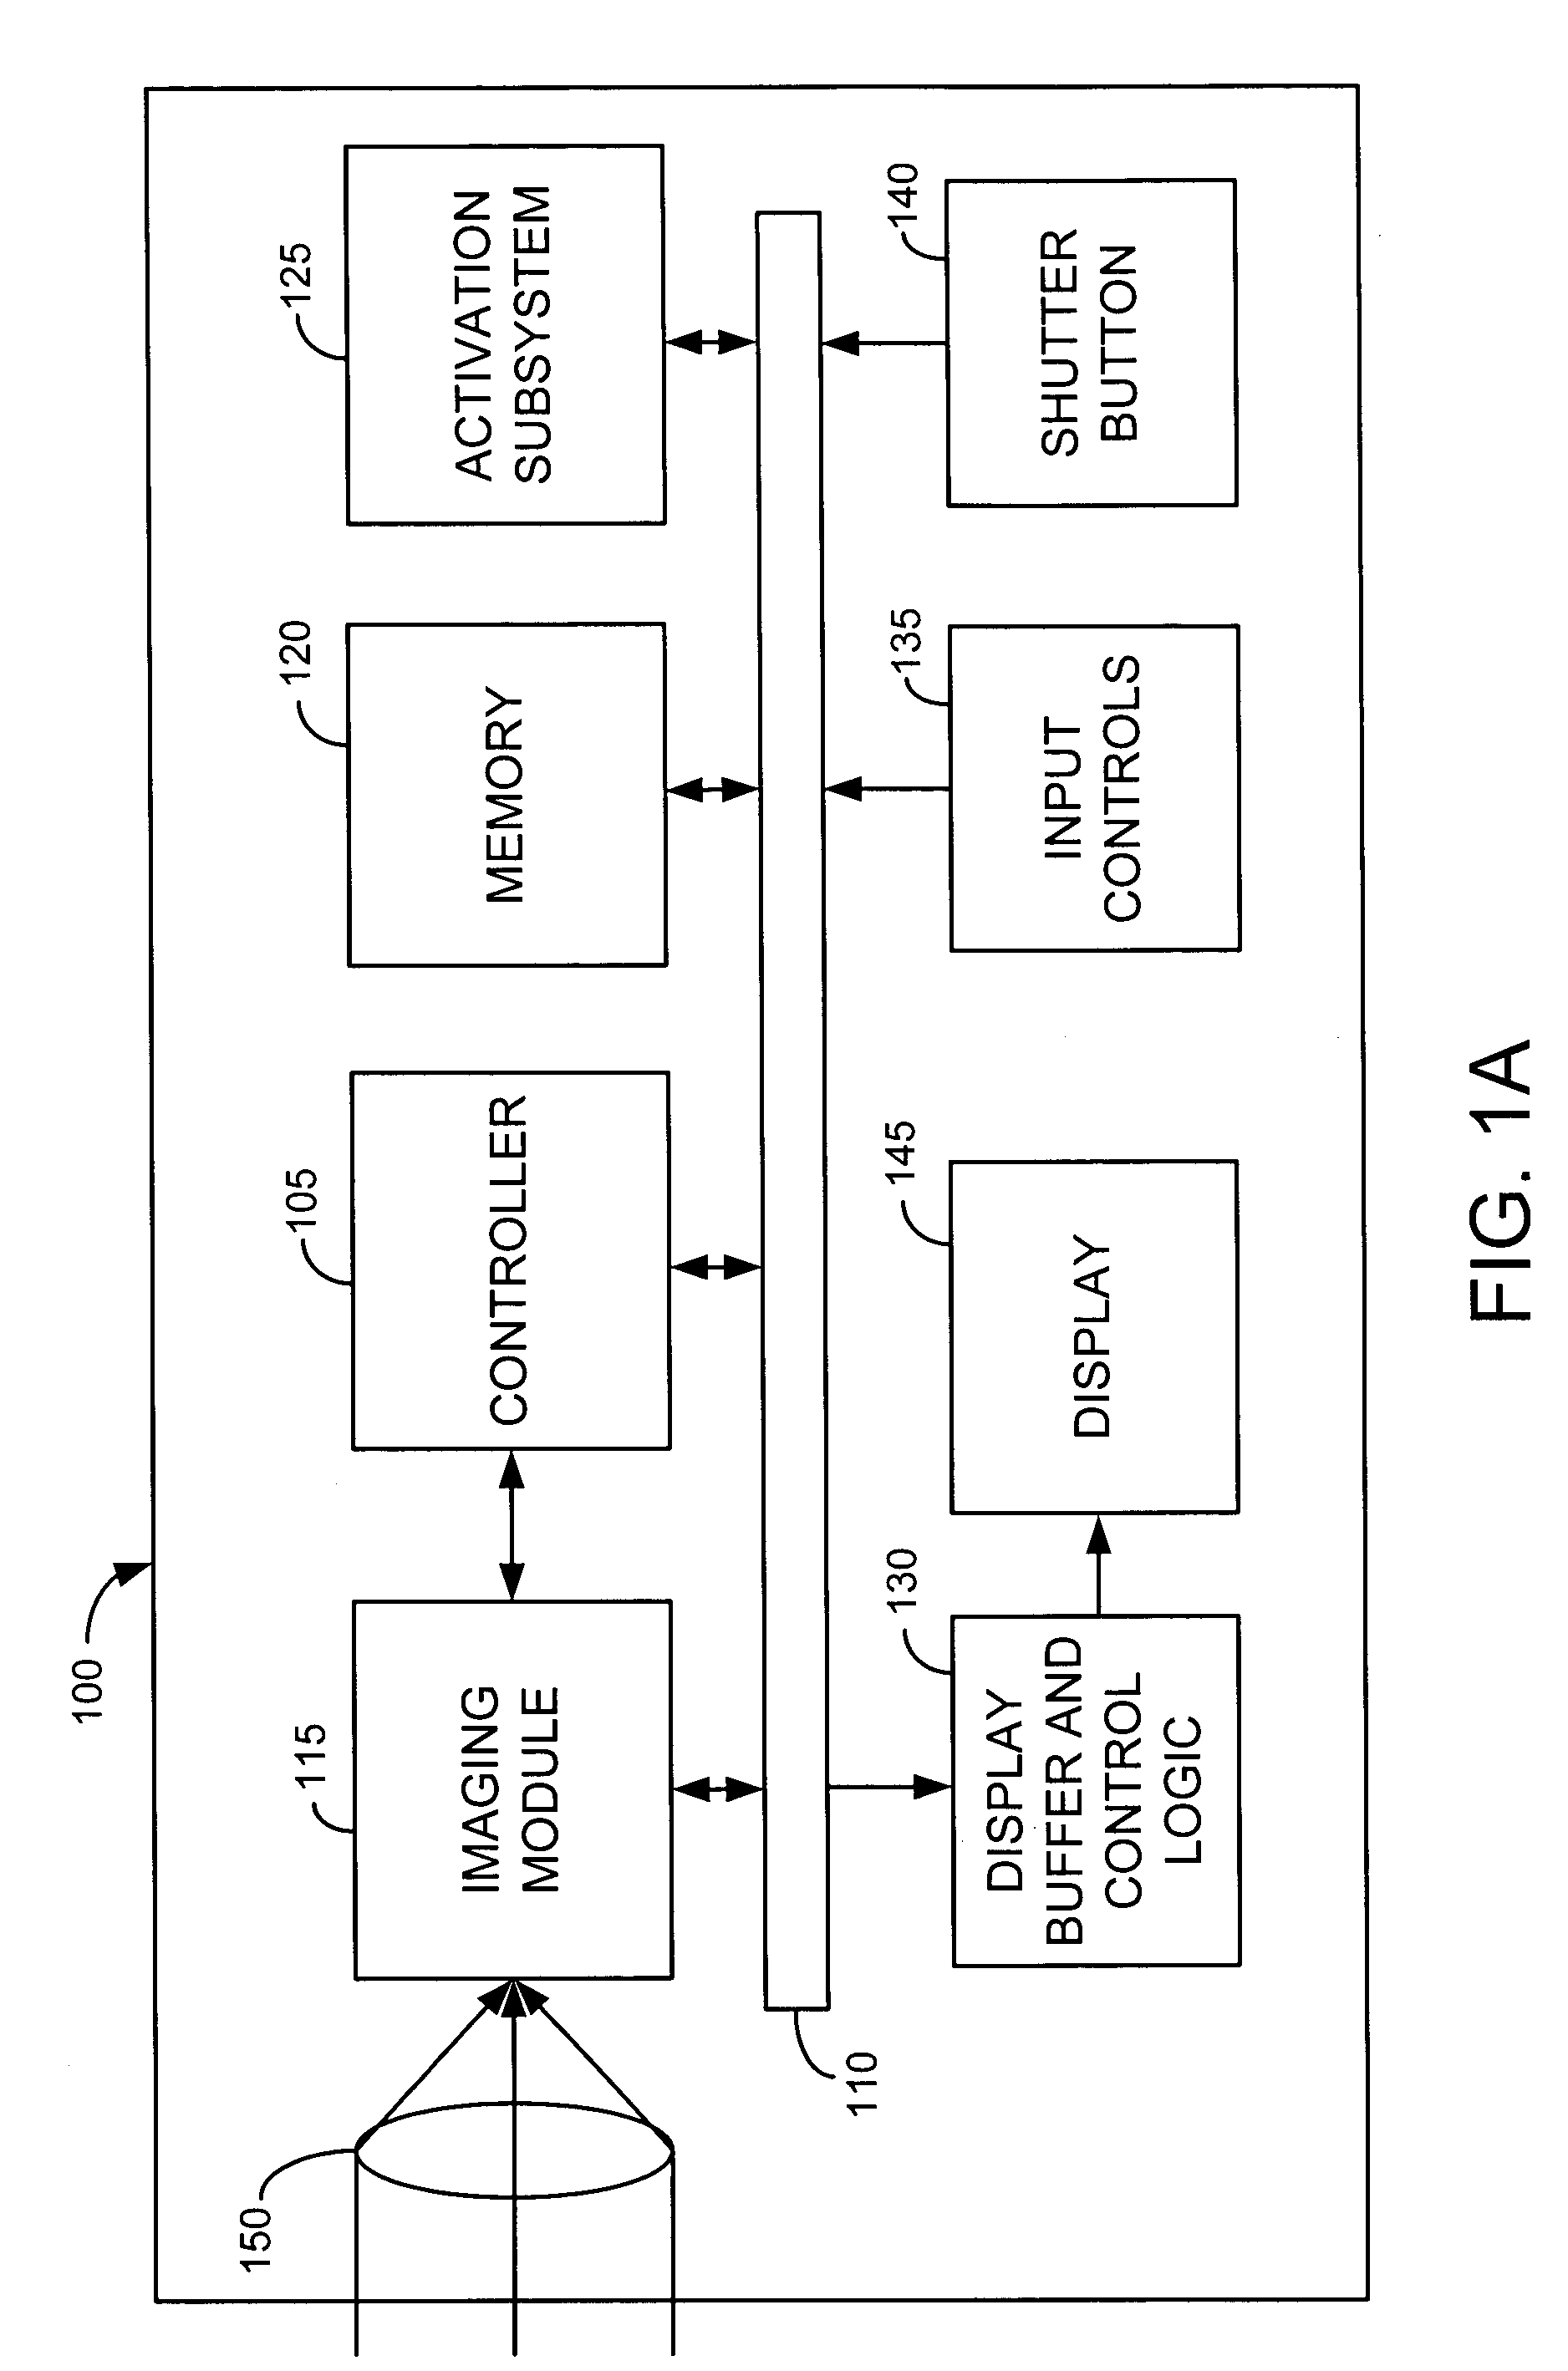 Method and apparatus for continuous focus and exposure in a digital imaging device